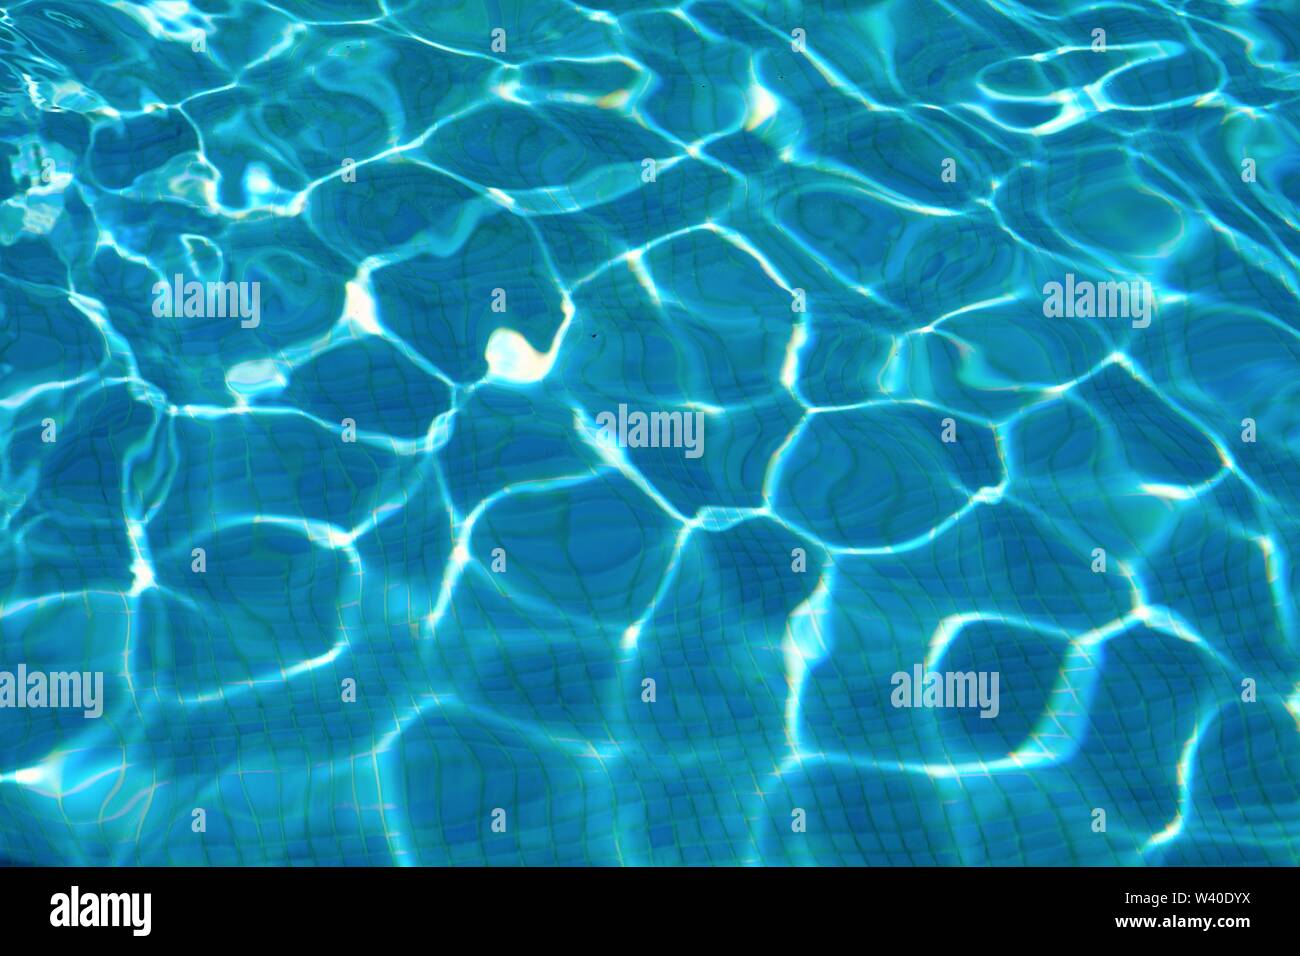 Abstract patterns formed by strong sunlight on the surface of water in a swimming pool  similar to  David Hockney's famous paintings Stock Photo